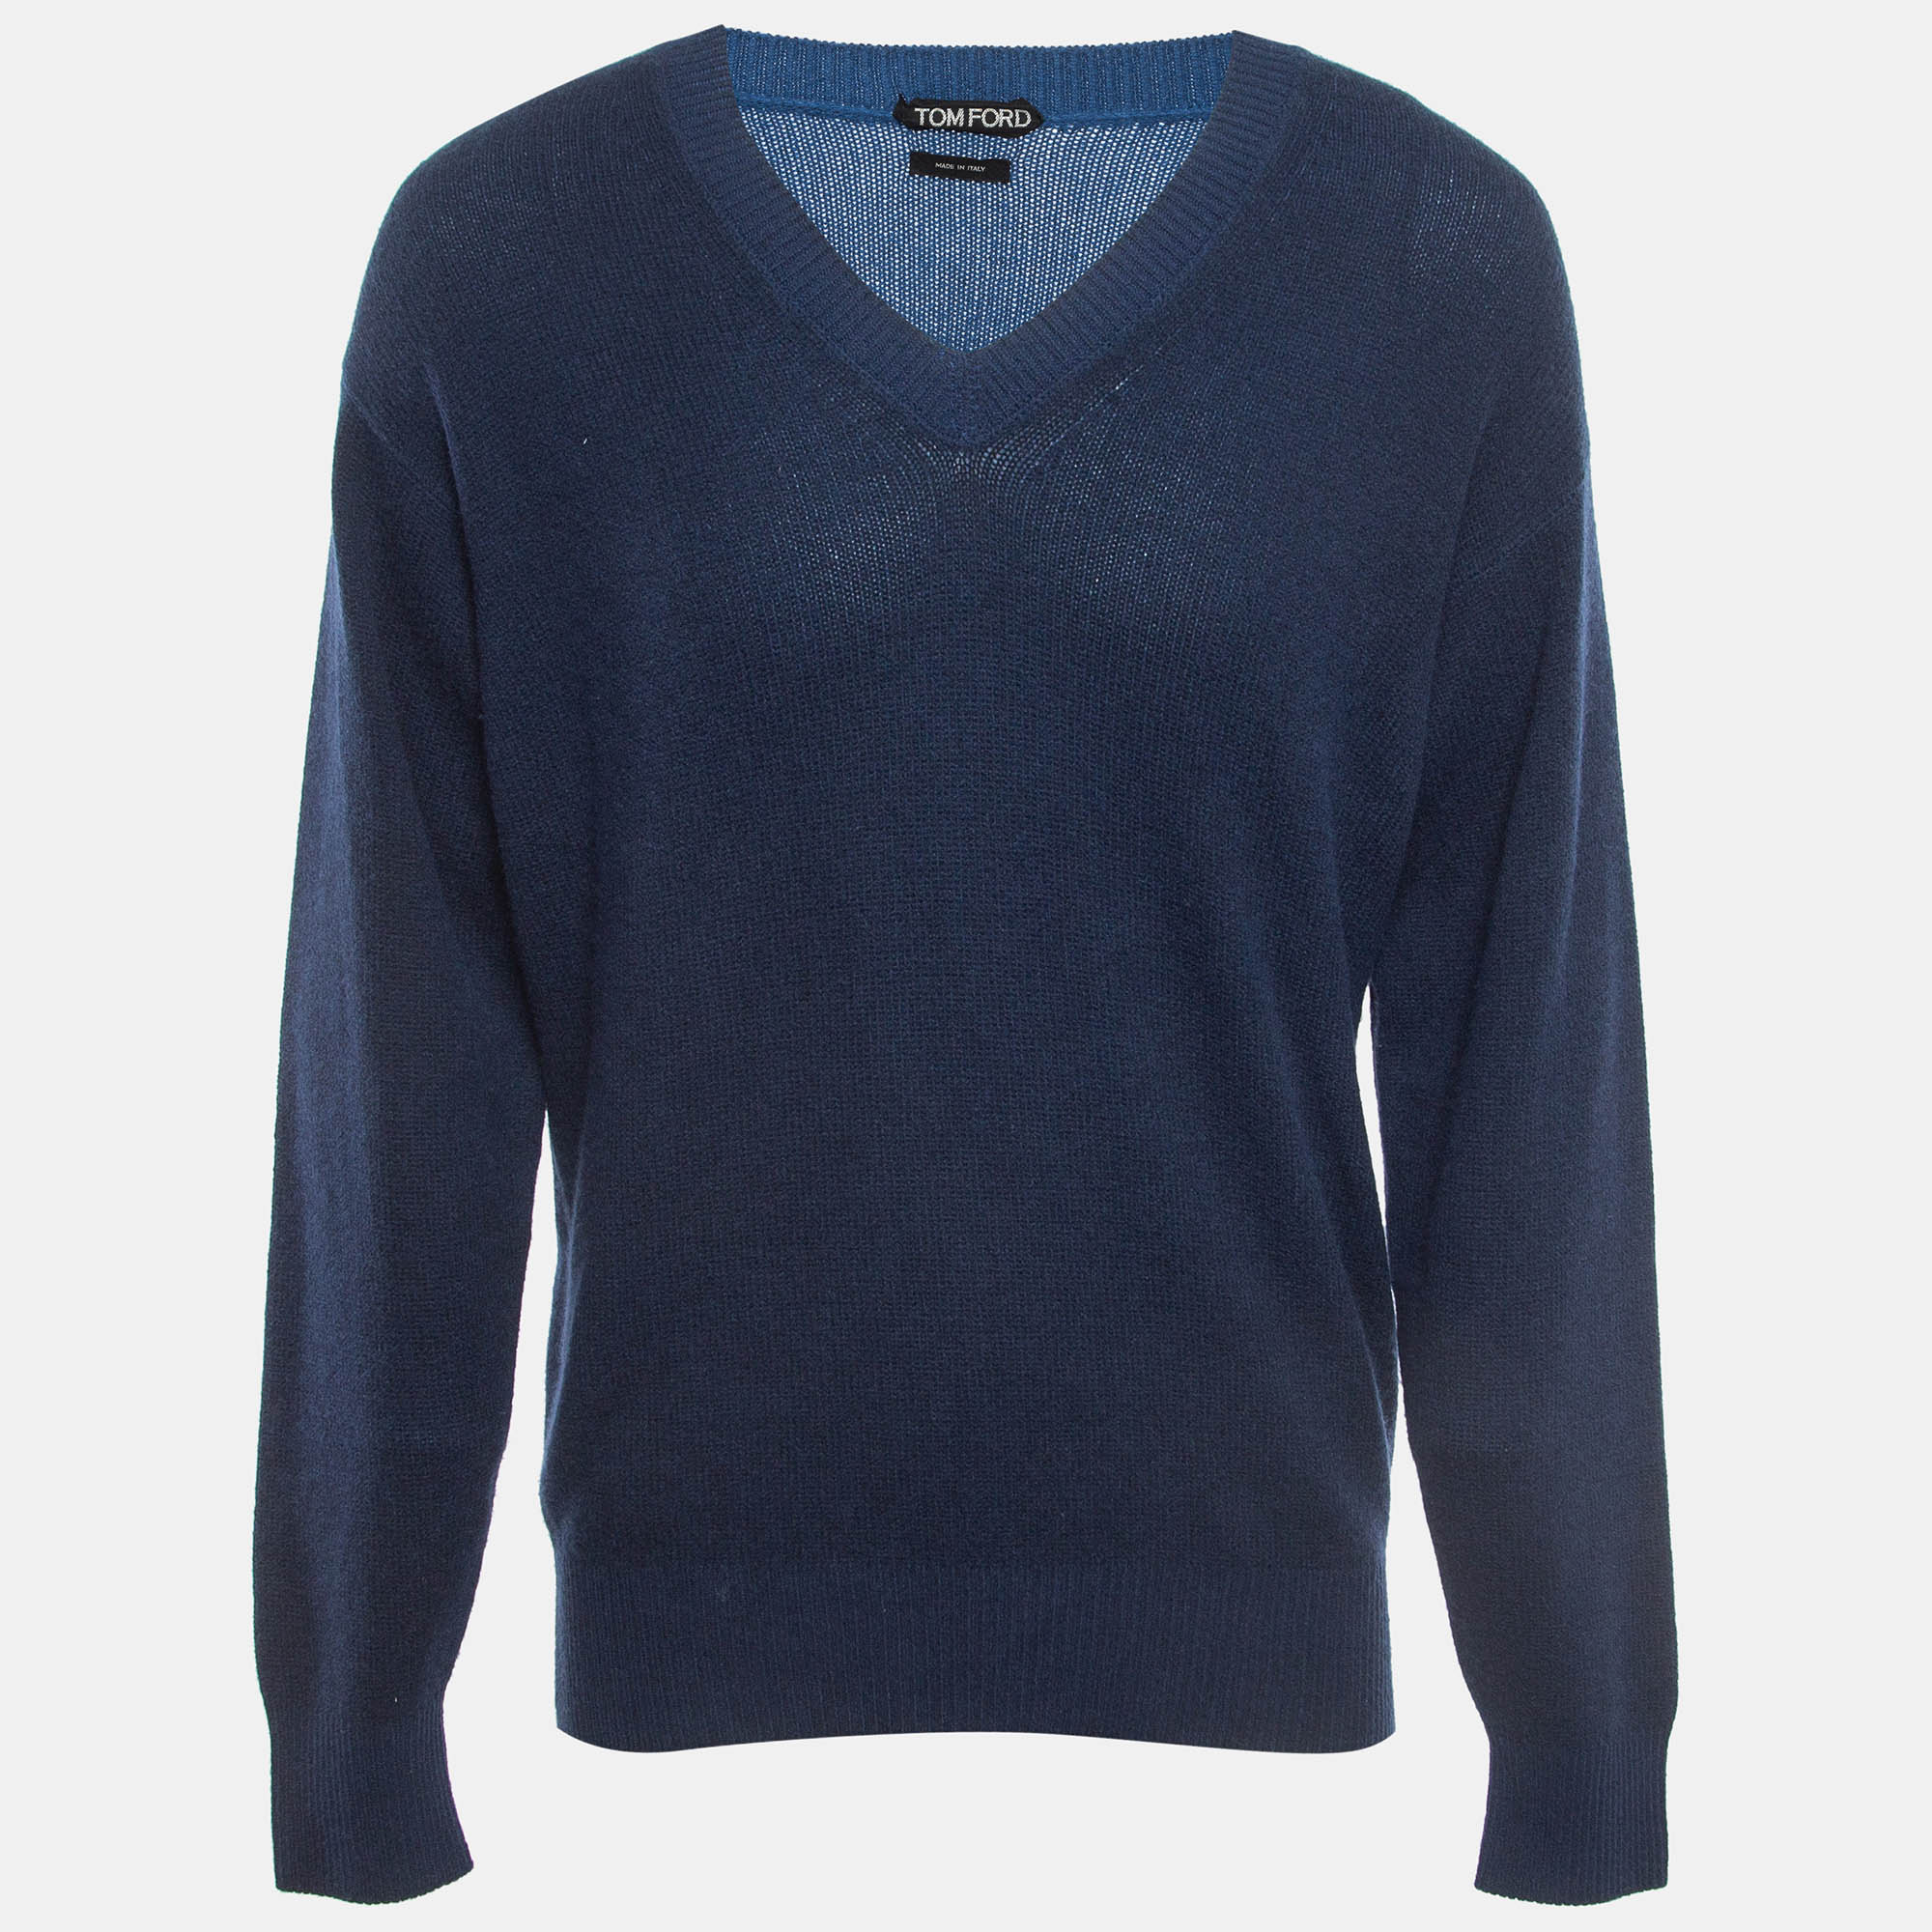 

Tom Ford Blue Cashmere Knit Sweater